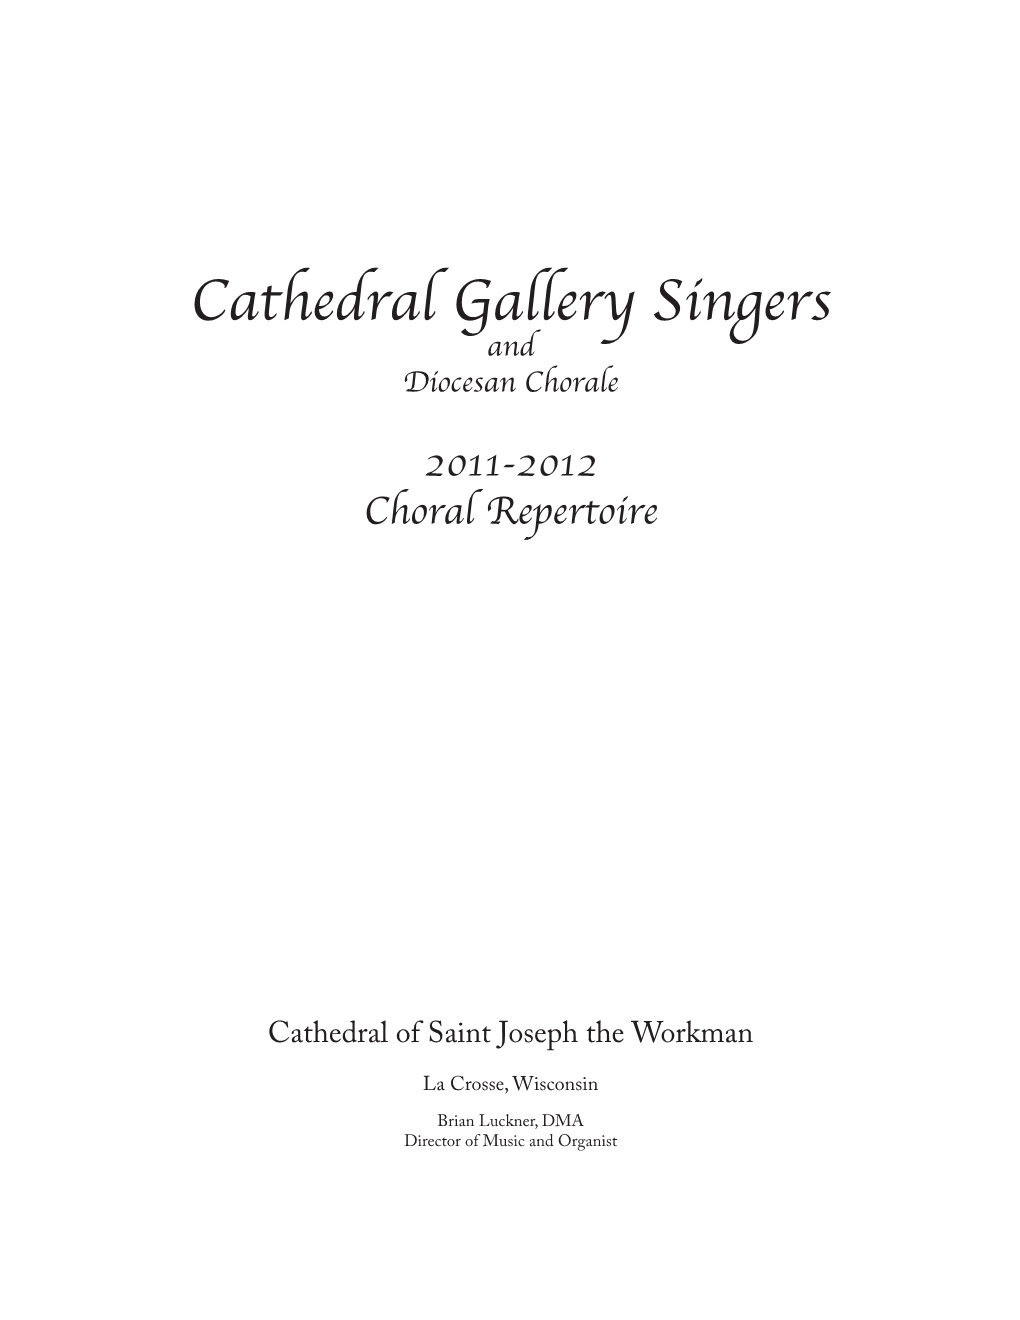 Cathedral Gallery Singers and Diocesan Chorale